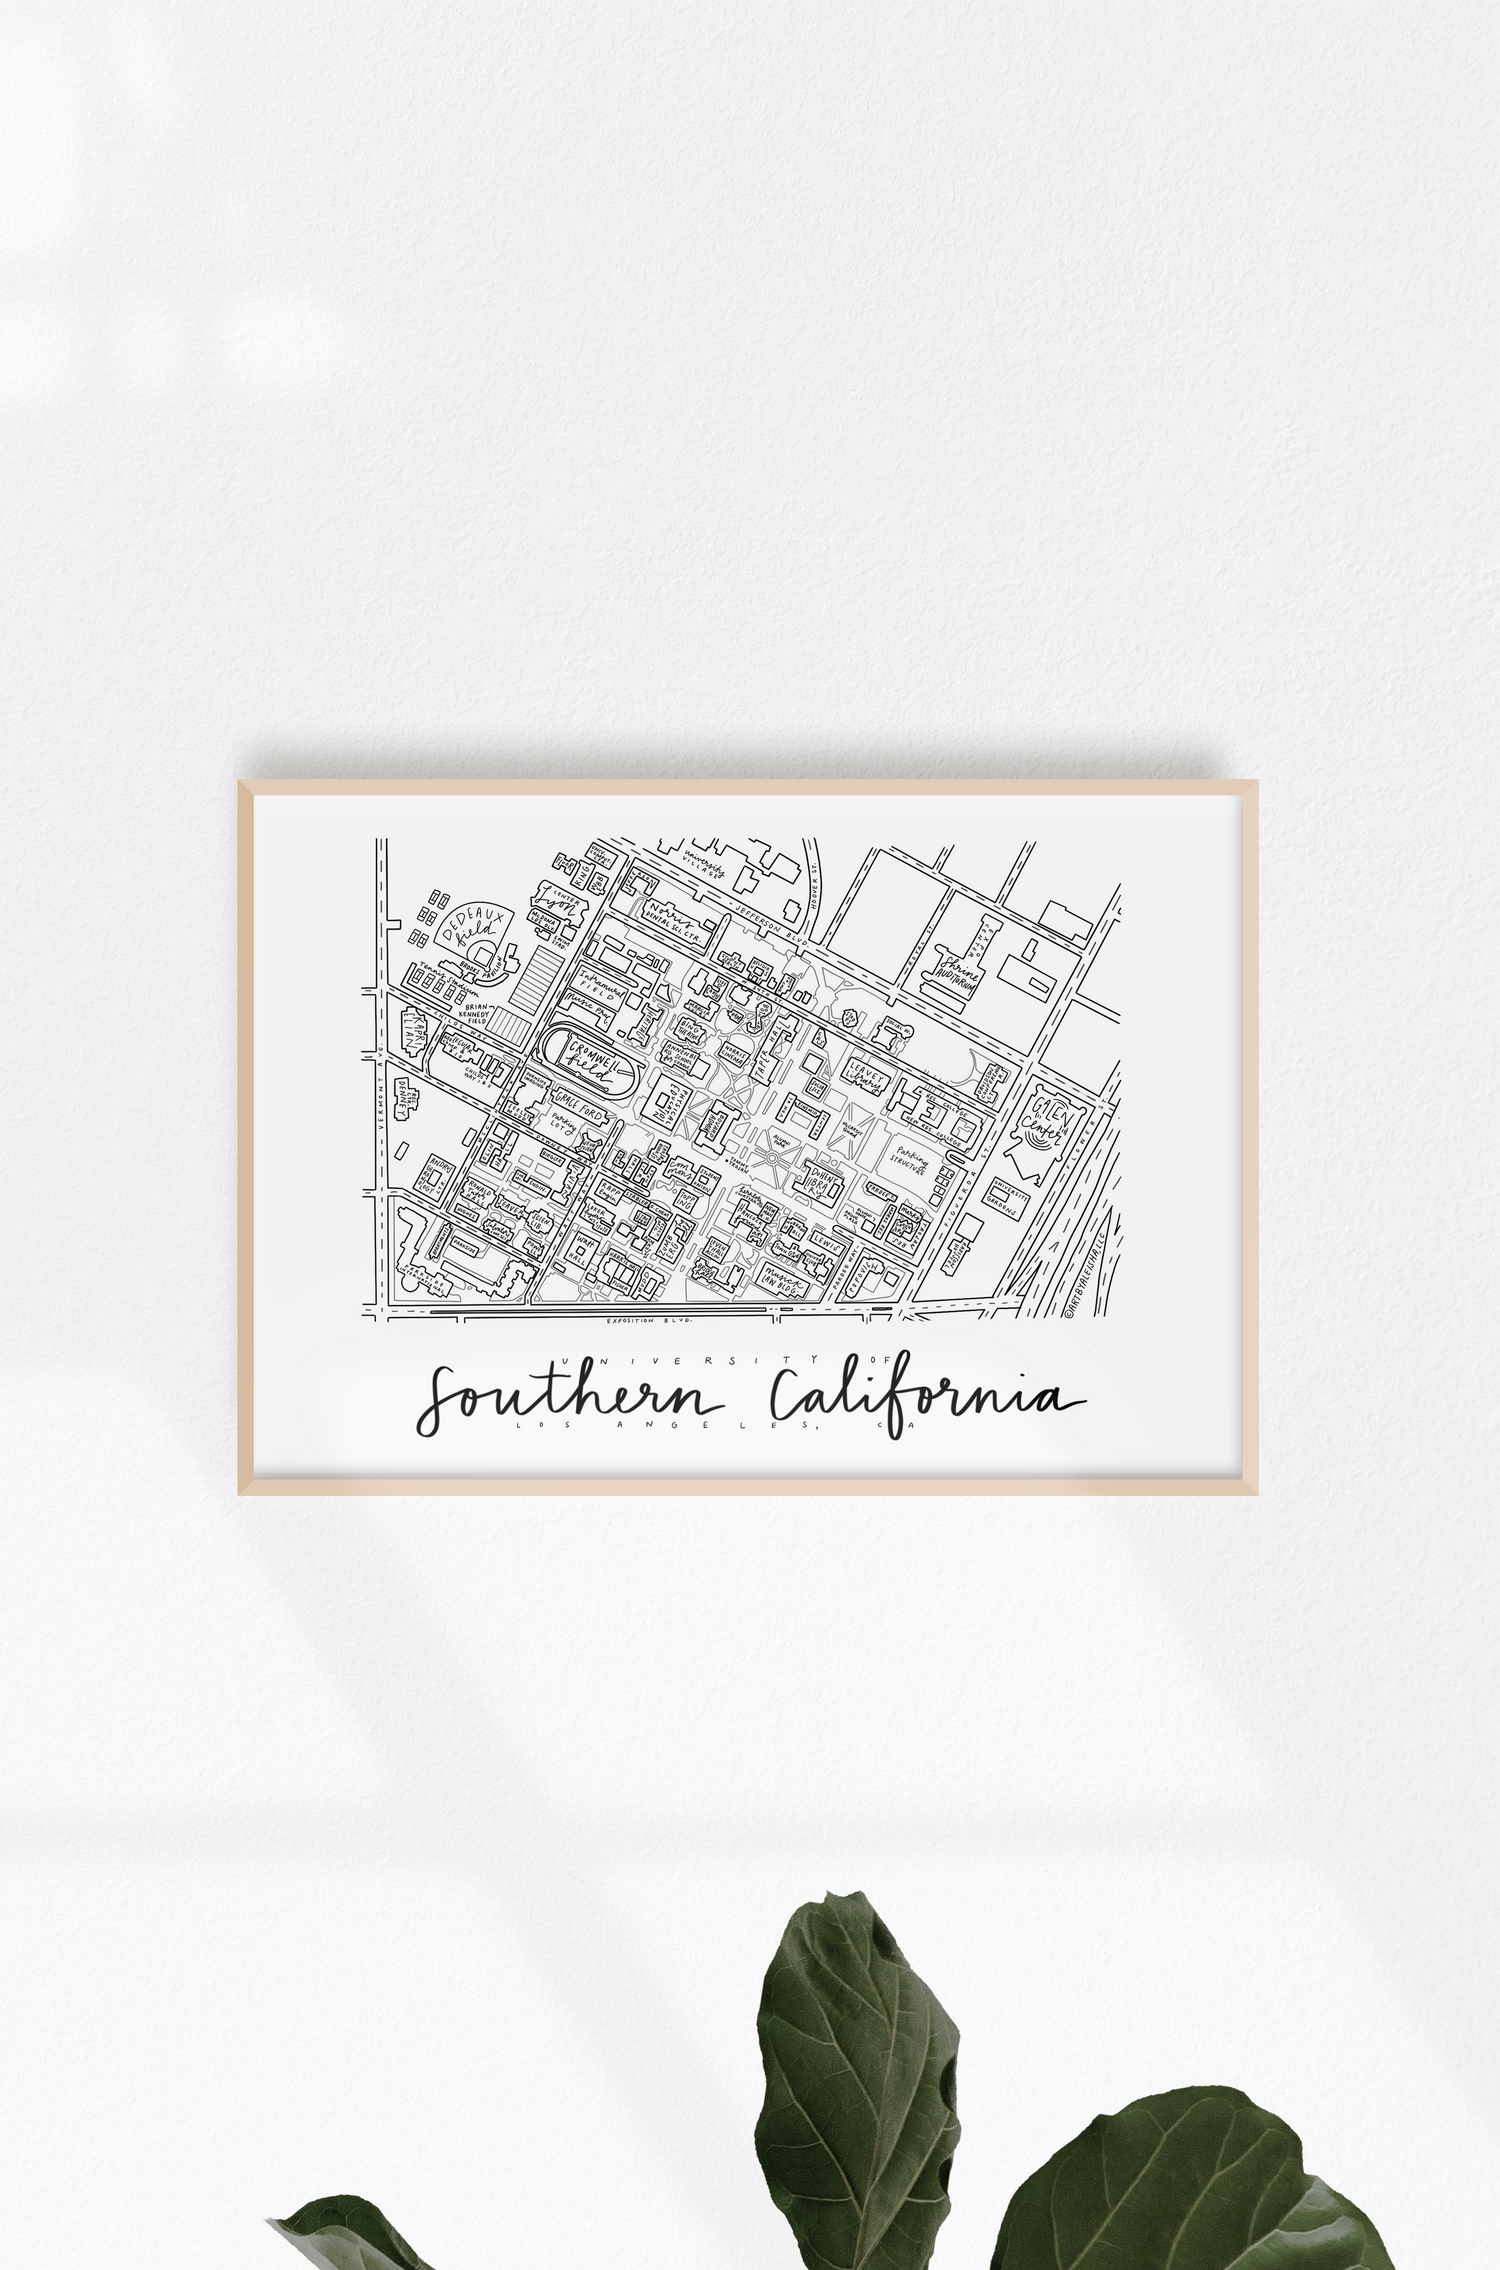 University Southern California (USC) Campus Map Print (BY) ALEISHA